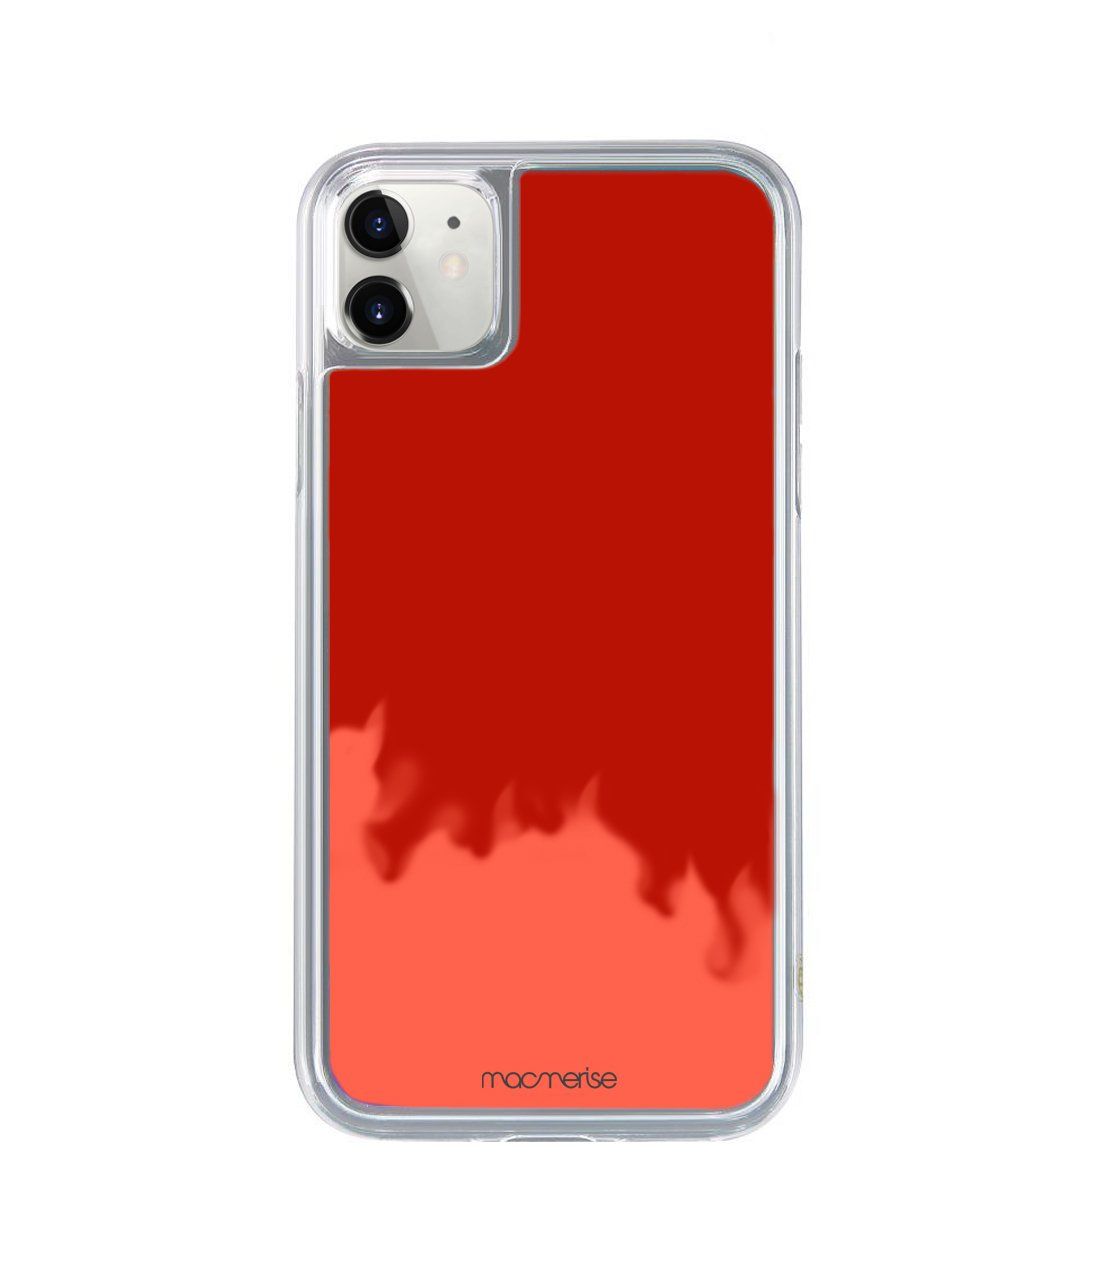 Neon Sand Red - Neon Sand Phone Case for iPhone 11